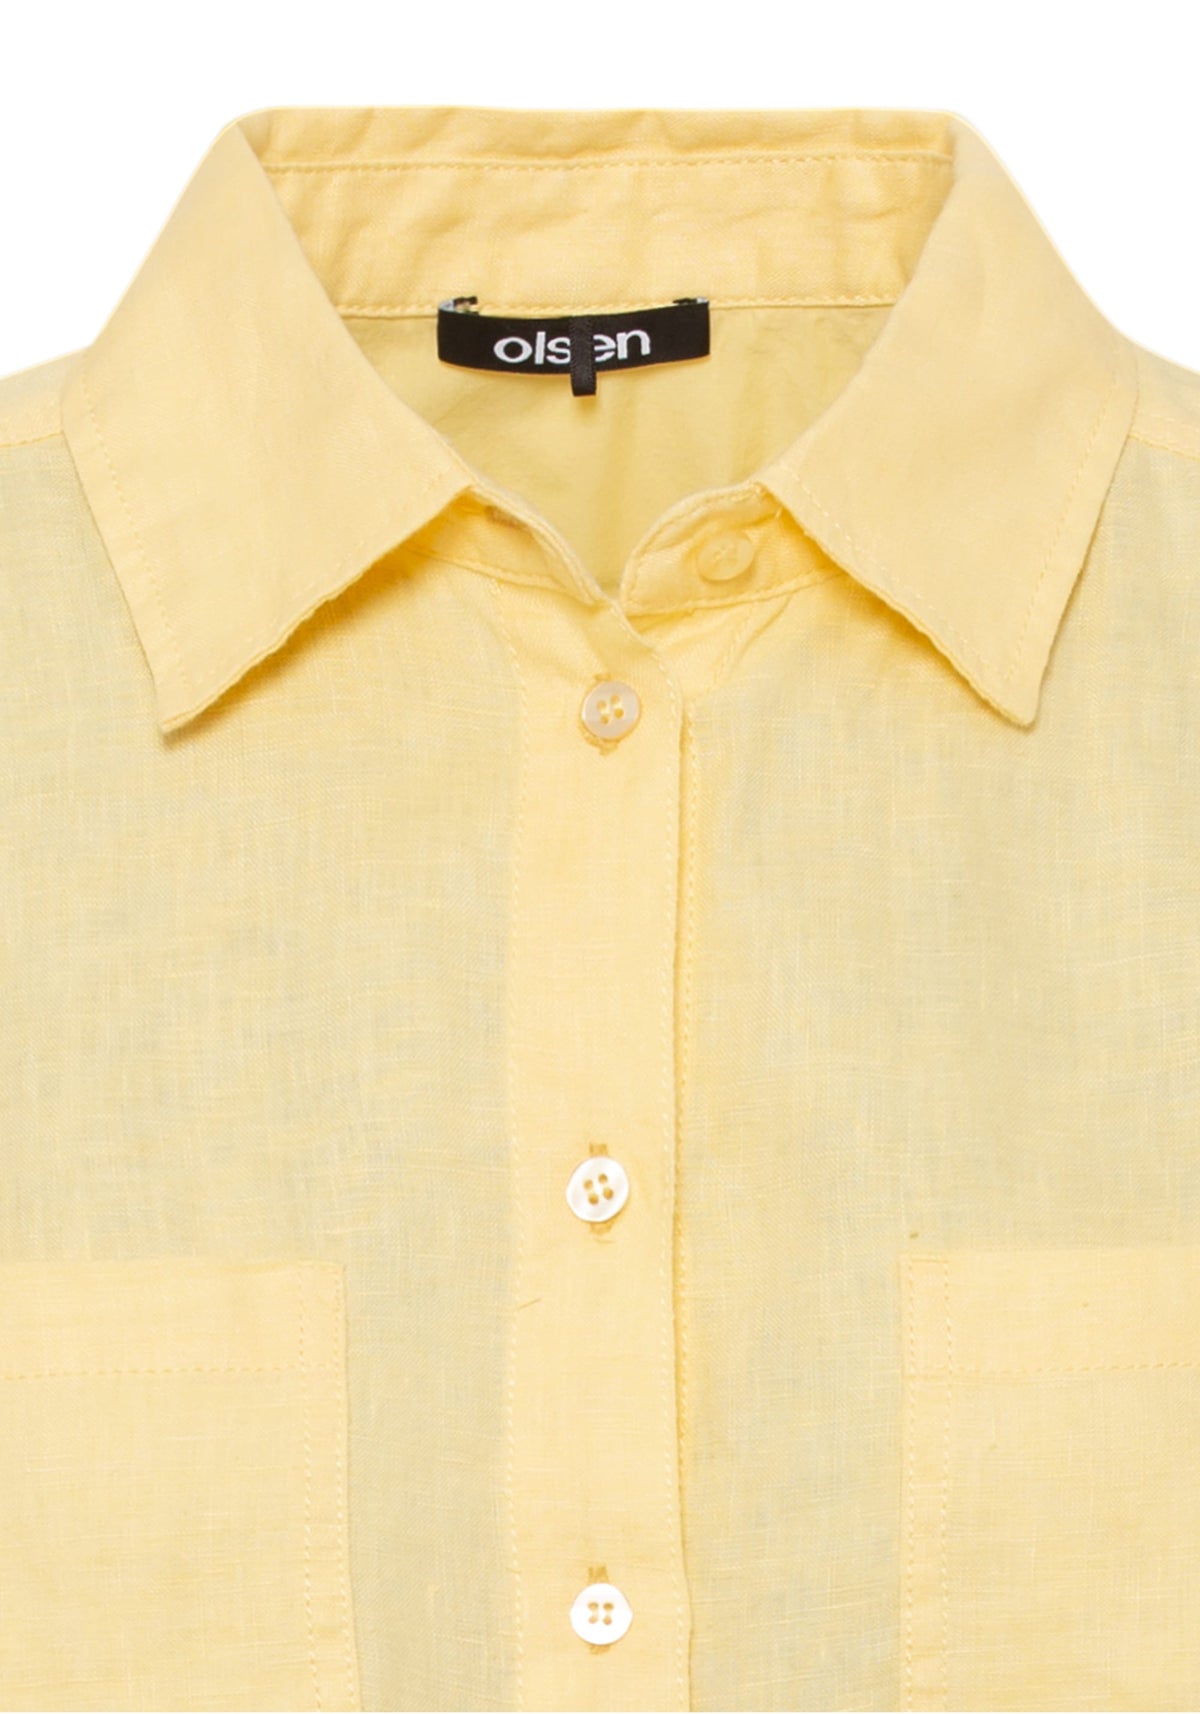 Cotton Linen Shirt with Rolled Sleeve Tab Detail